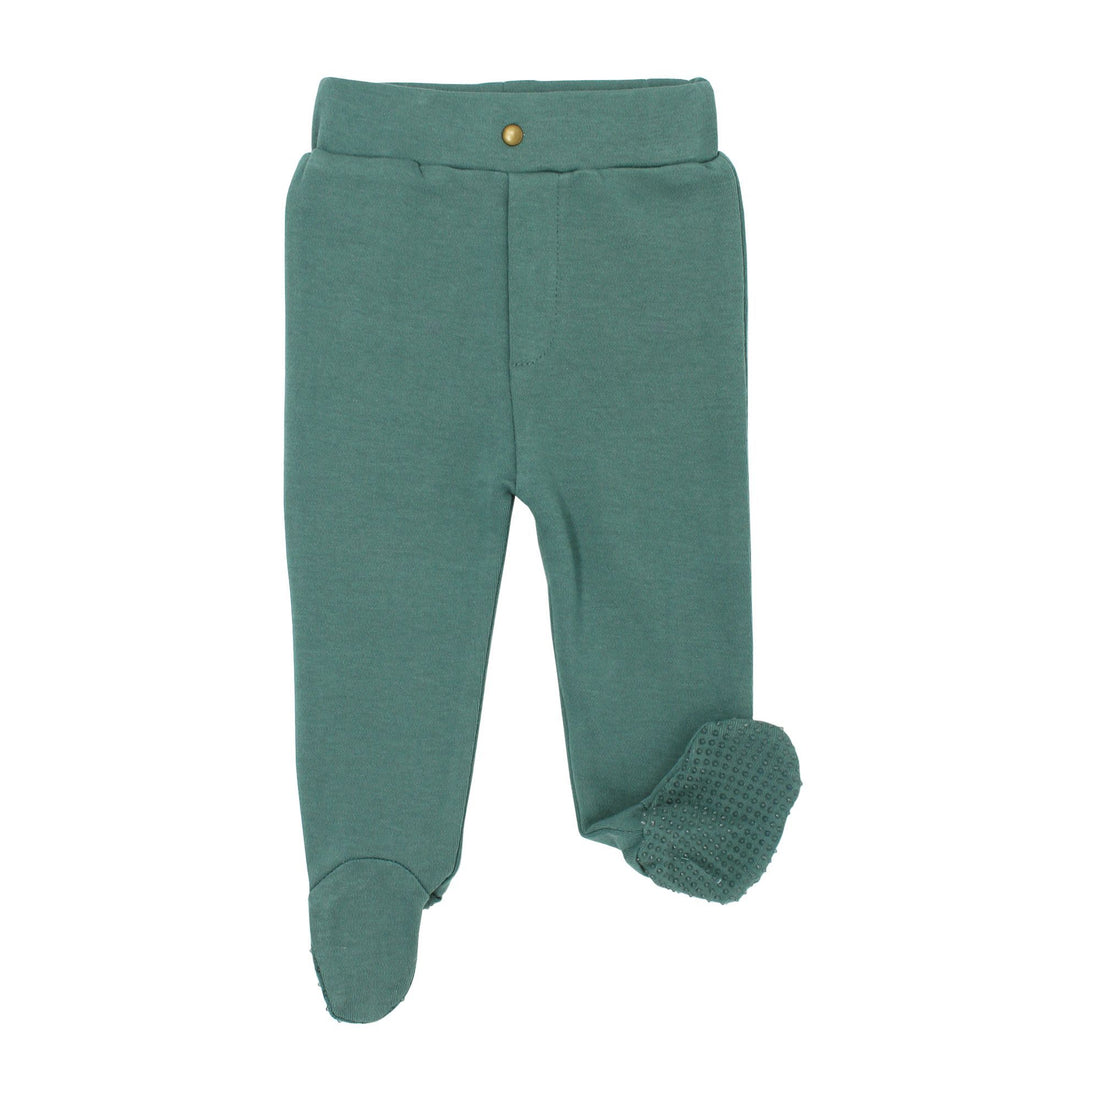 Organic Spruce Green Footed Pant-Bottoms-Loved Baby-0-3 M-Spruce Green-bluebird baby & kids